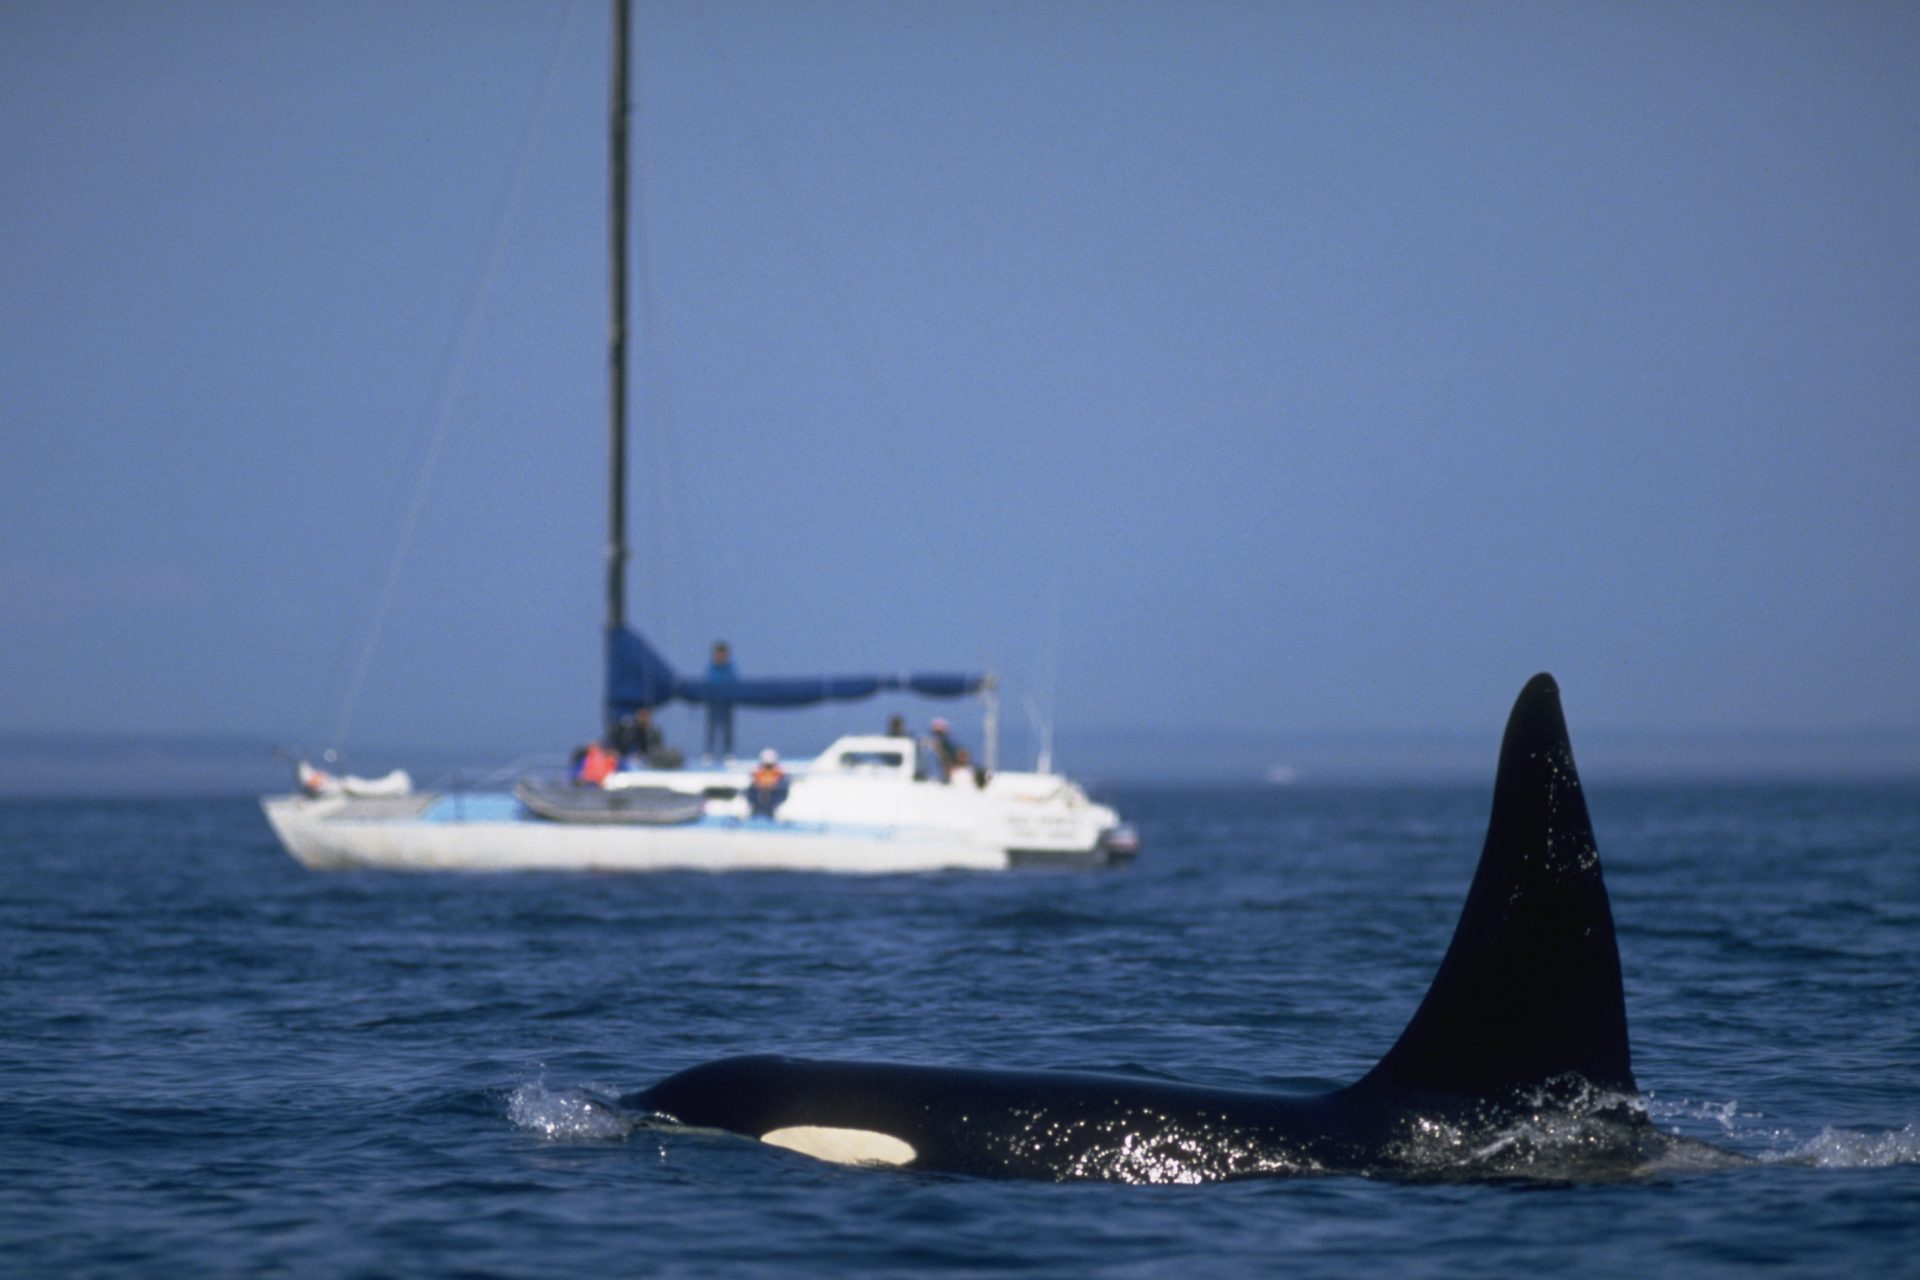 Orca Uprising: Why did killer whales target racing yachts during The Ocean Race?